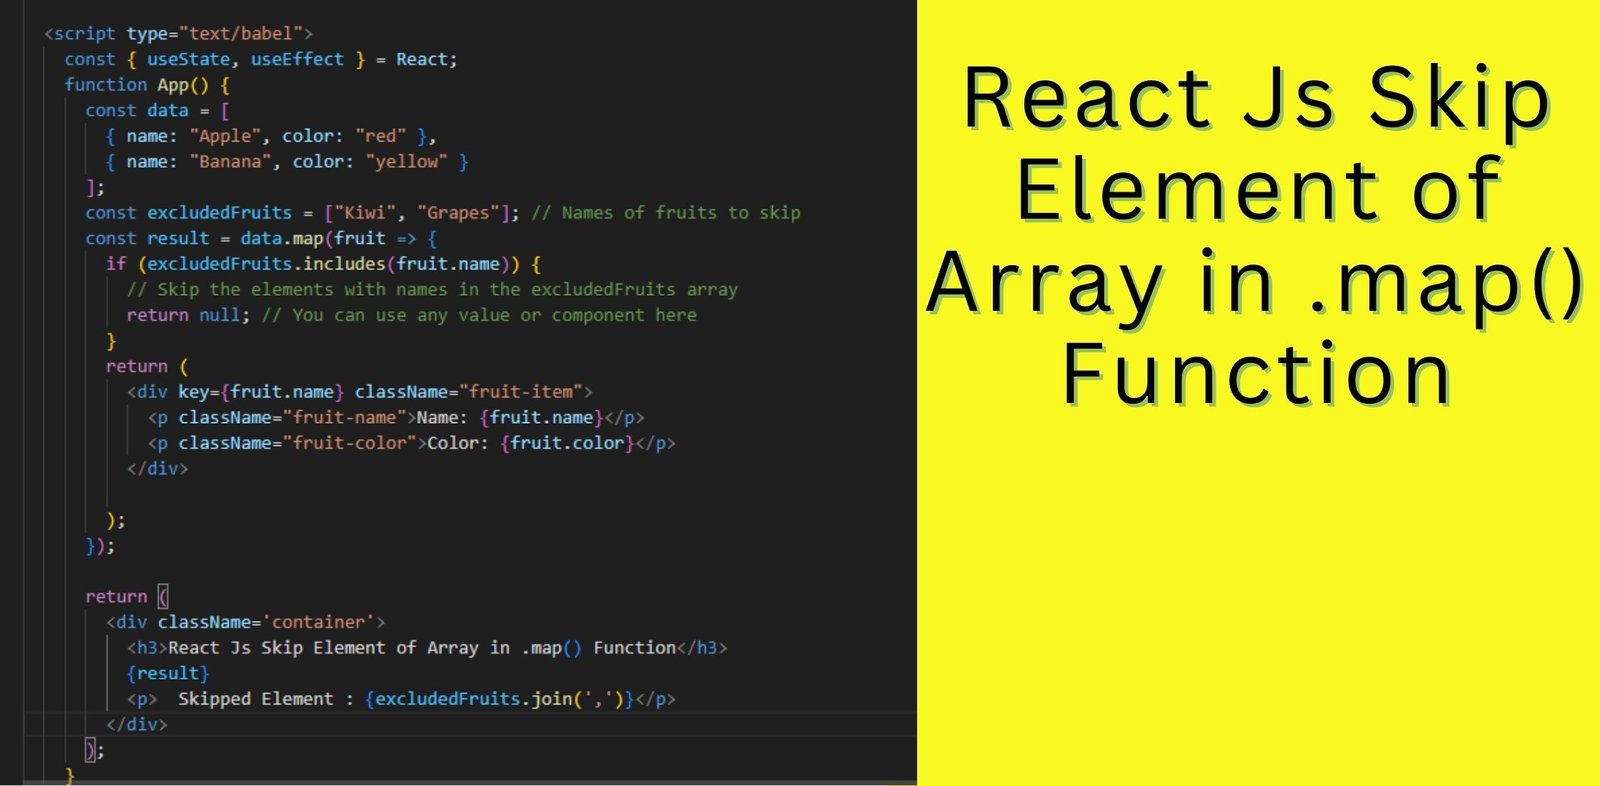 React Js Skip Element of Array in .map() Function